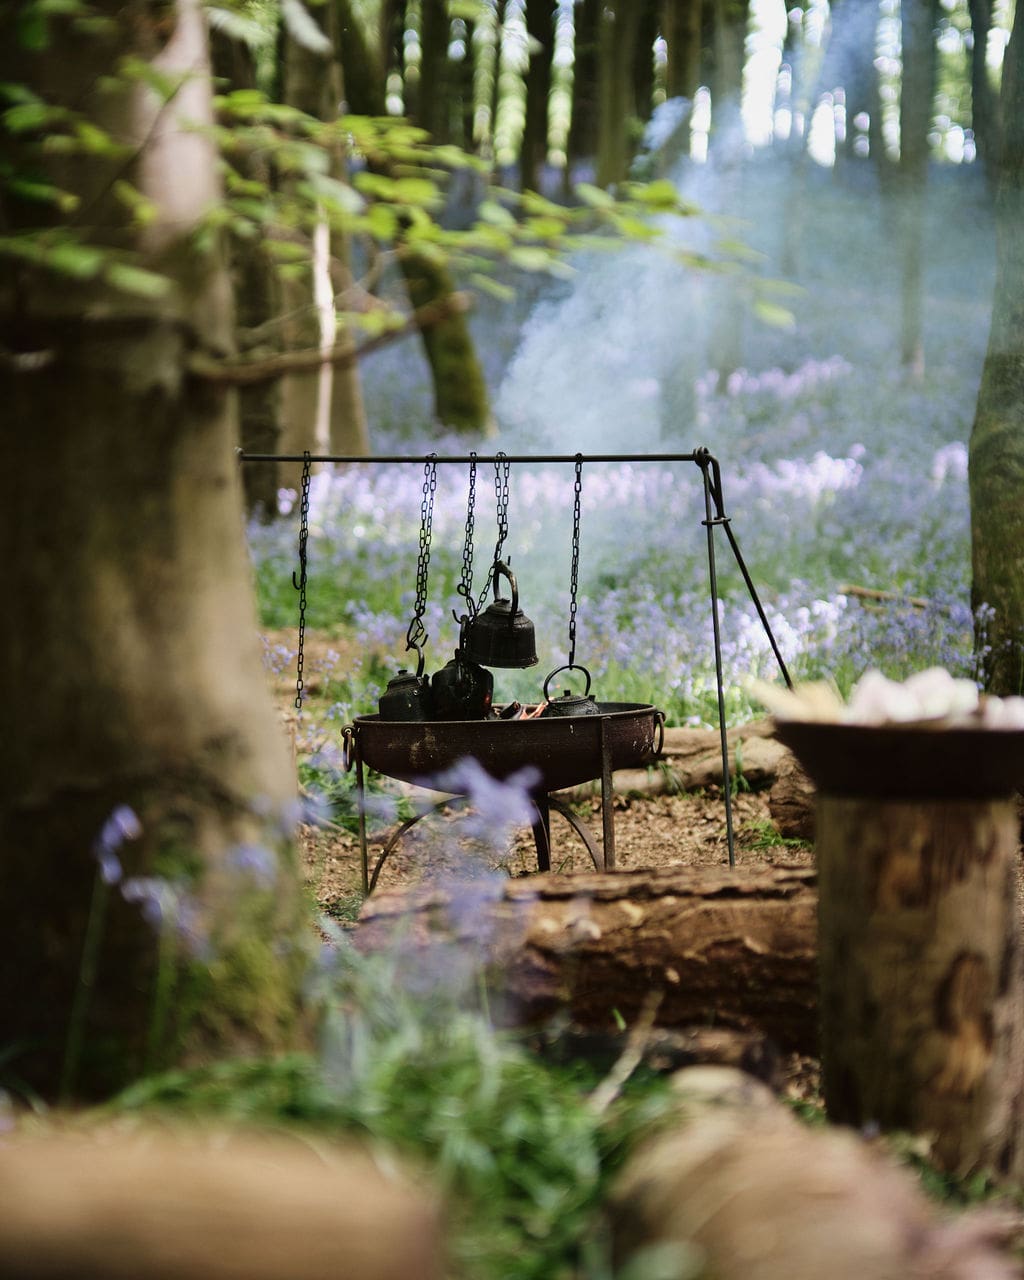 Four kettles hanging in chains over a fire, surrounded by Nomadic's woodland for Meta's World Earth Day Corporate Experience